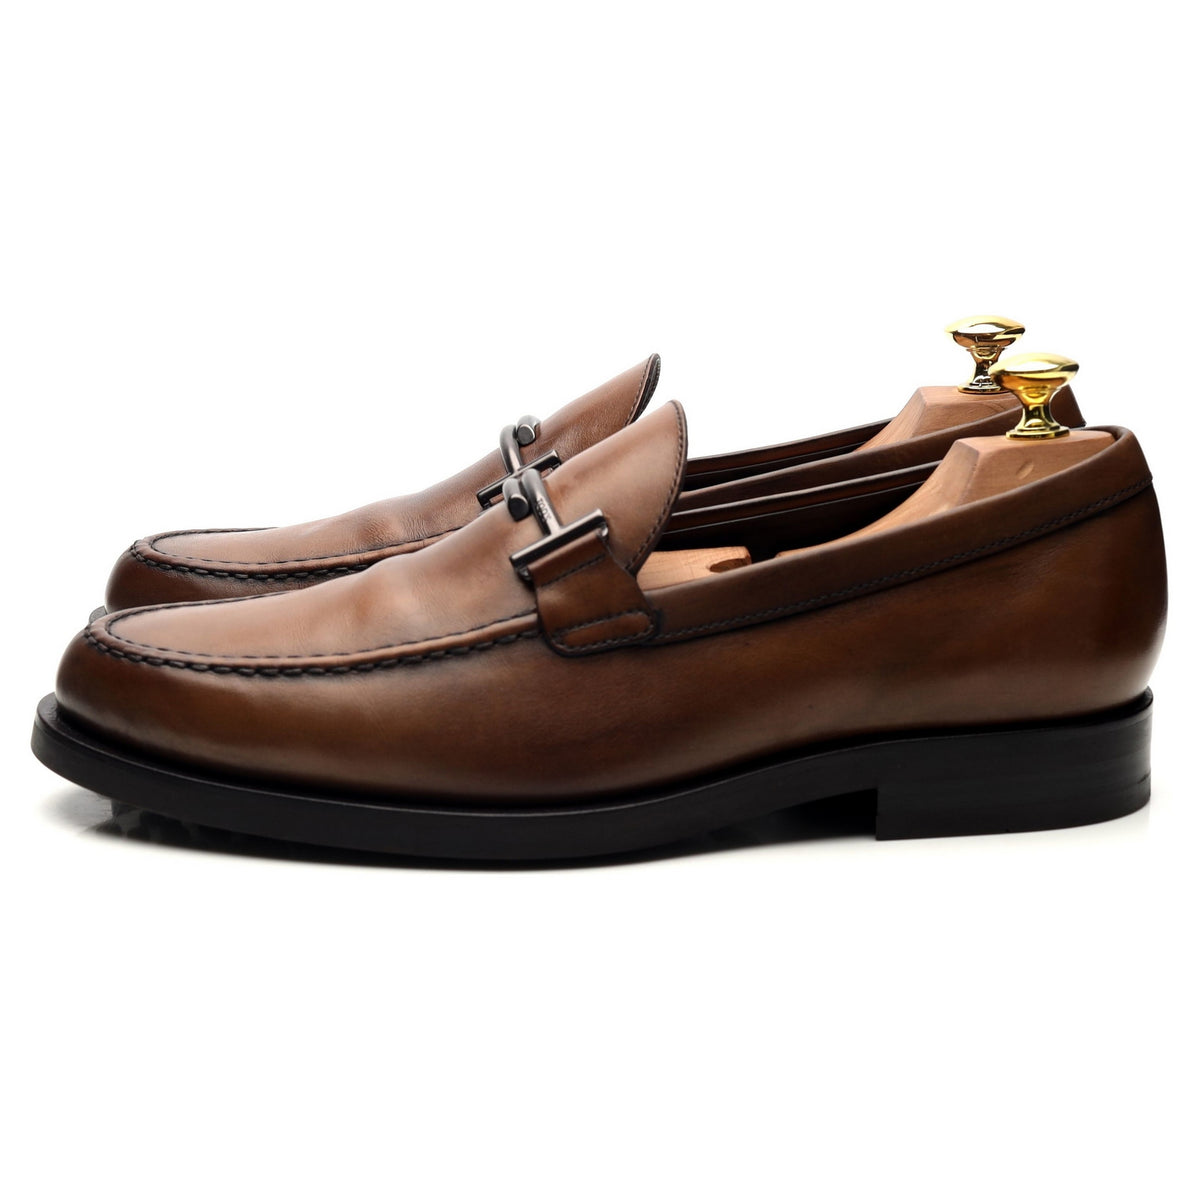 Brown Leather Horsebit Loafers UK 7.5